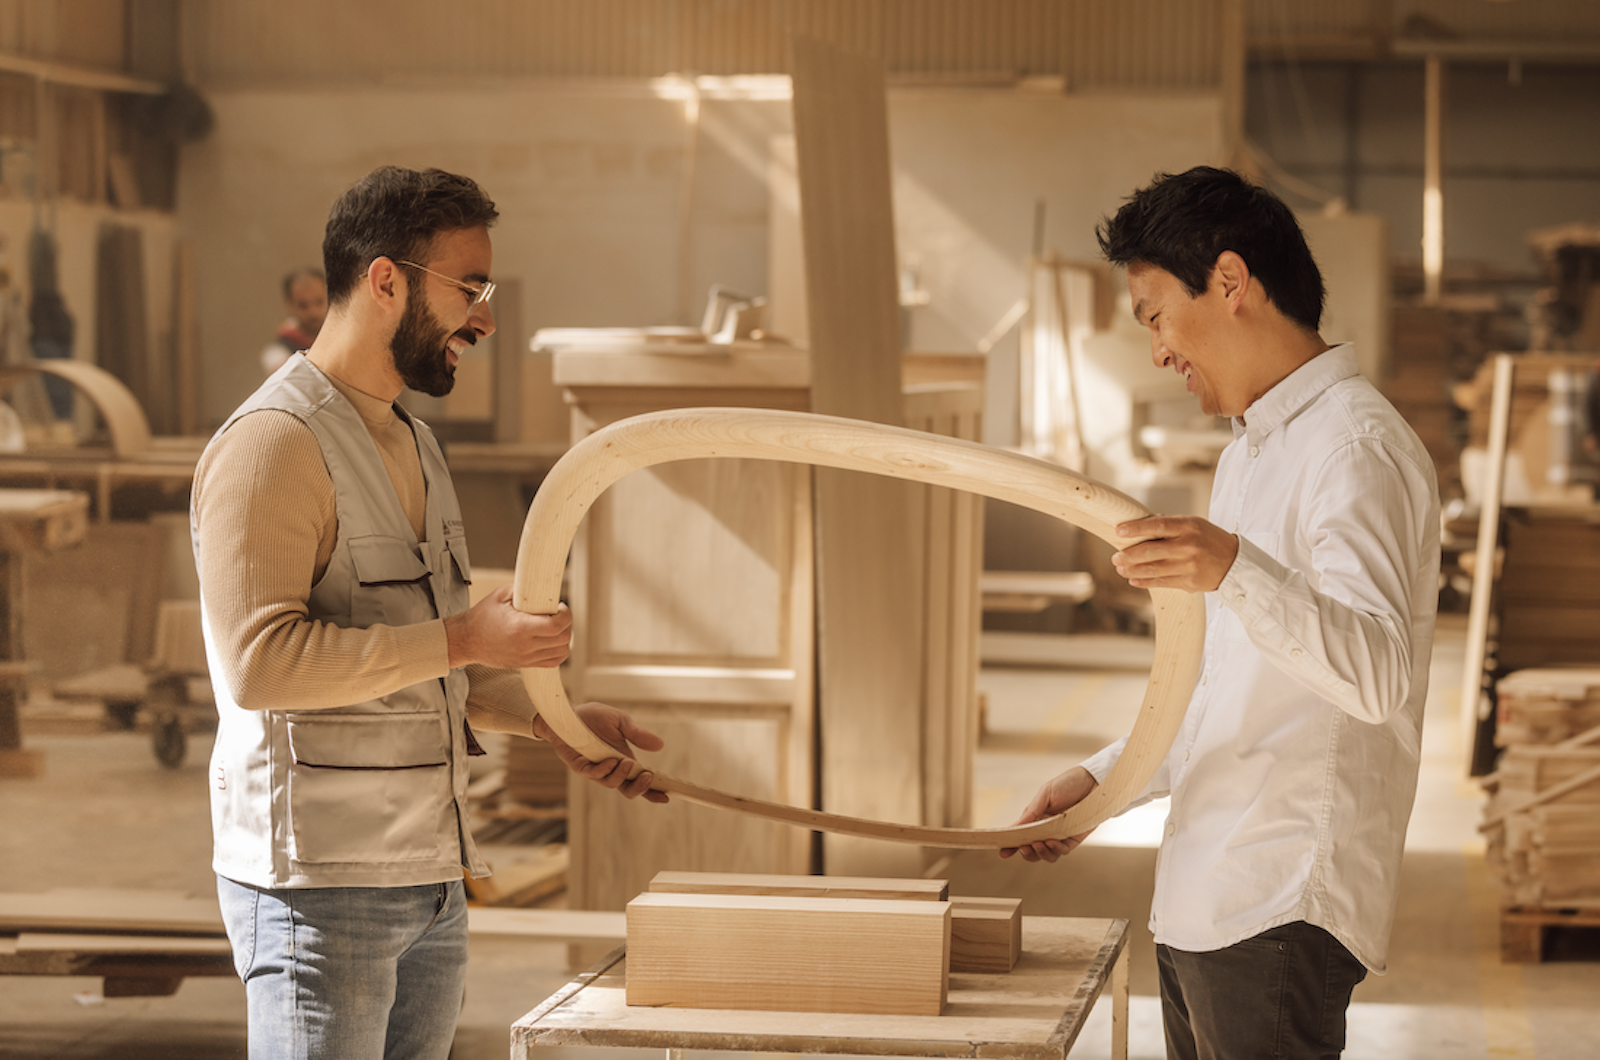 Designer Gabriel Tan (right) moved his family to Porto to work with local artisans and be closer to European design centres.